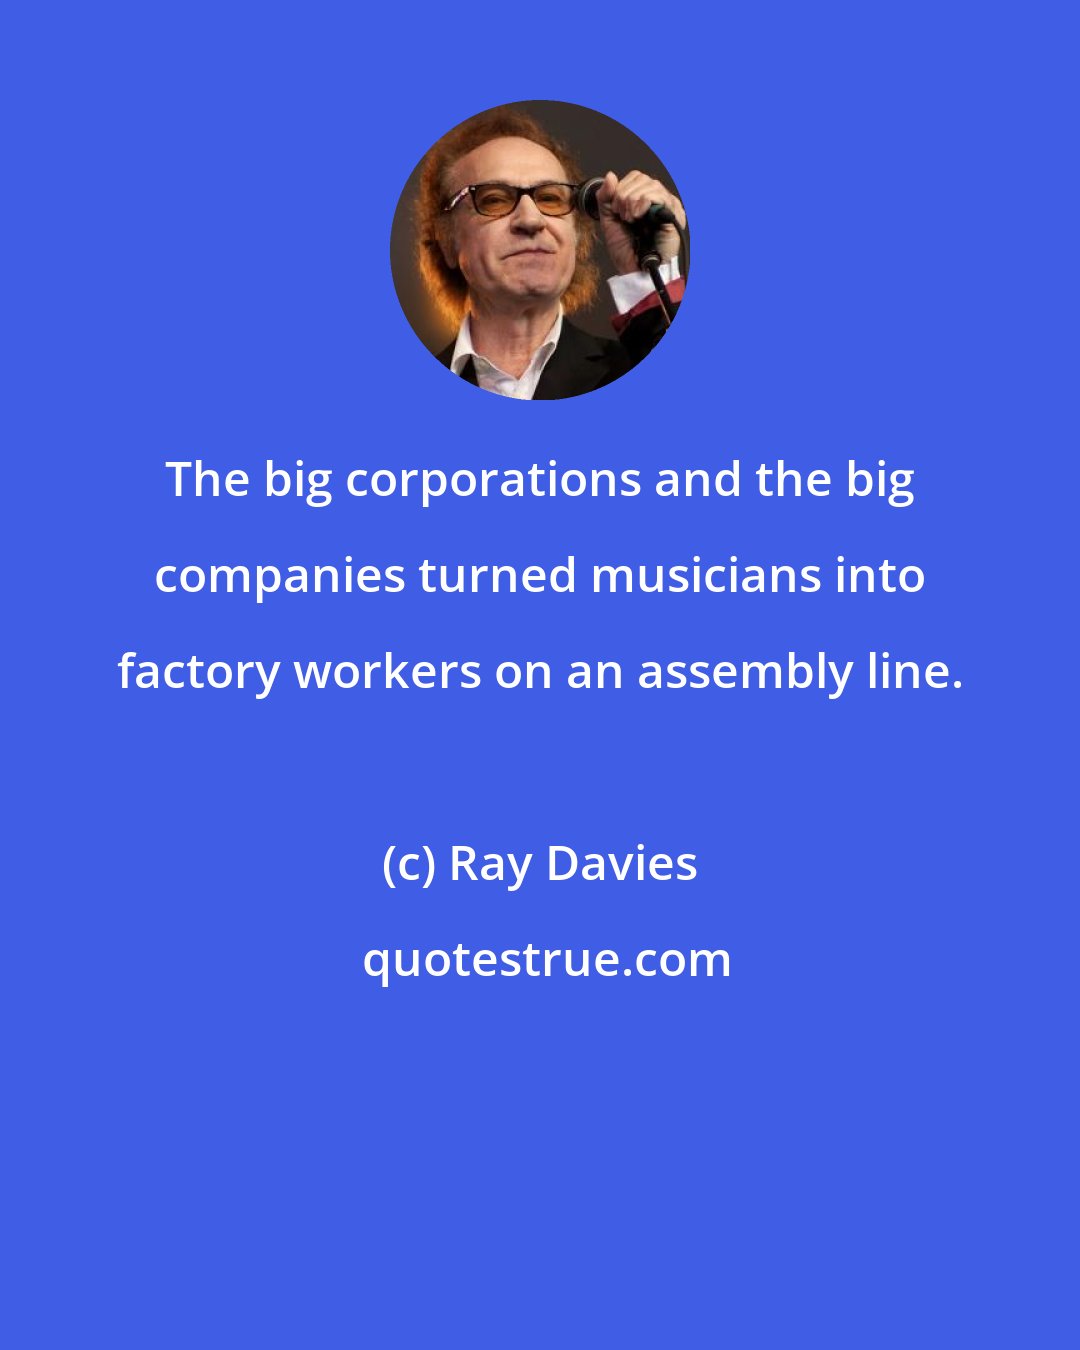 Ray Davies: The big corporations and the big companies turned musicians into factory workers on an assembly line.